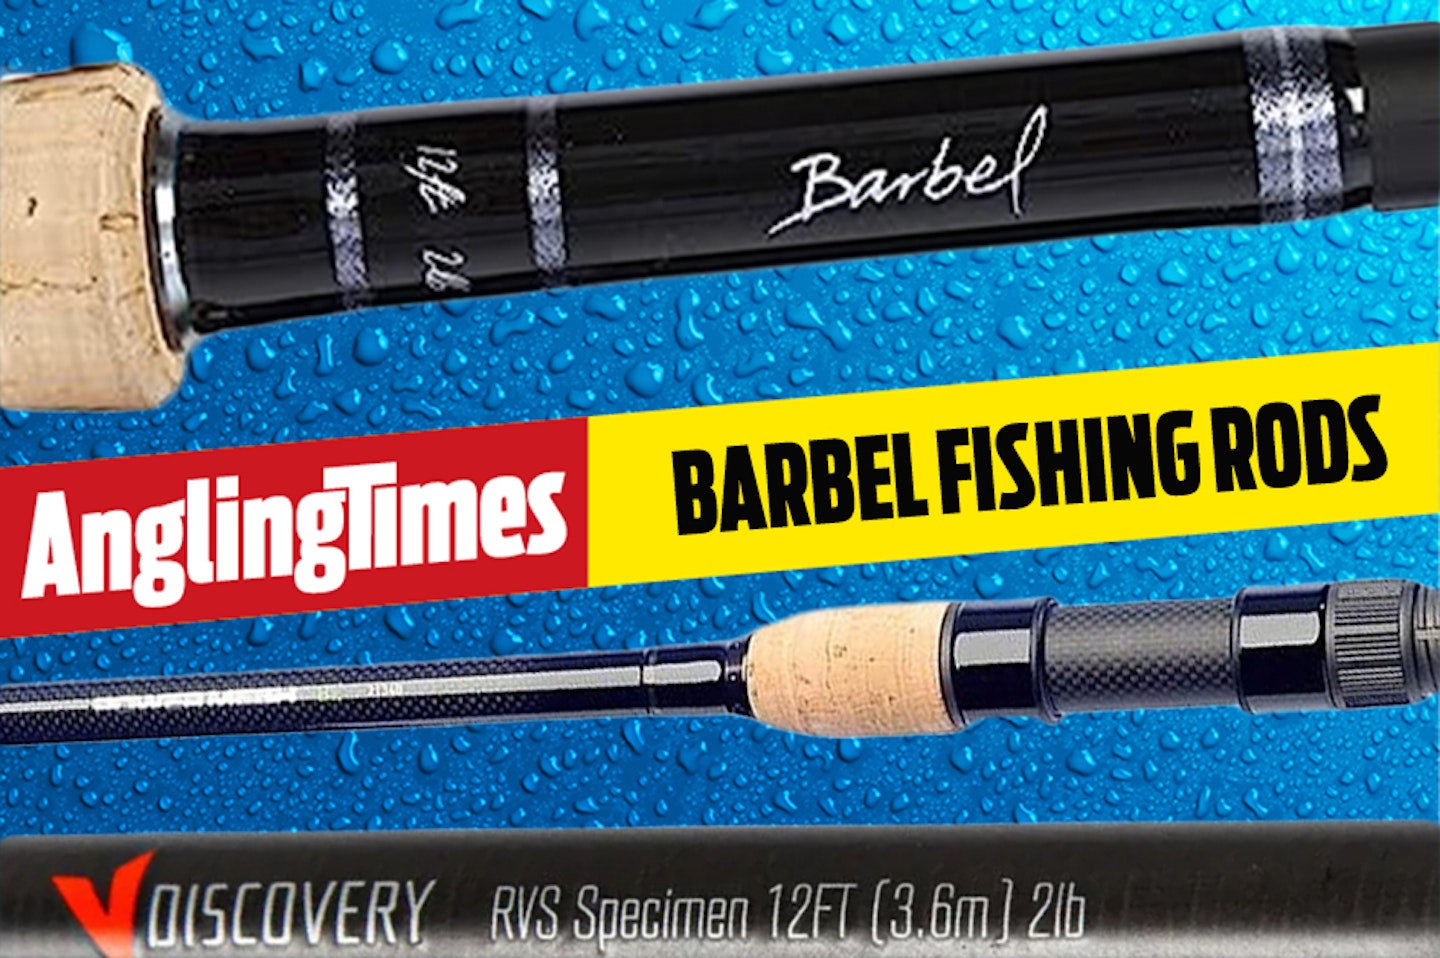 The Best Rods for Barbel Fishing